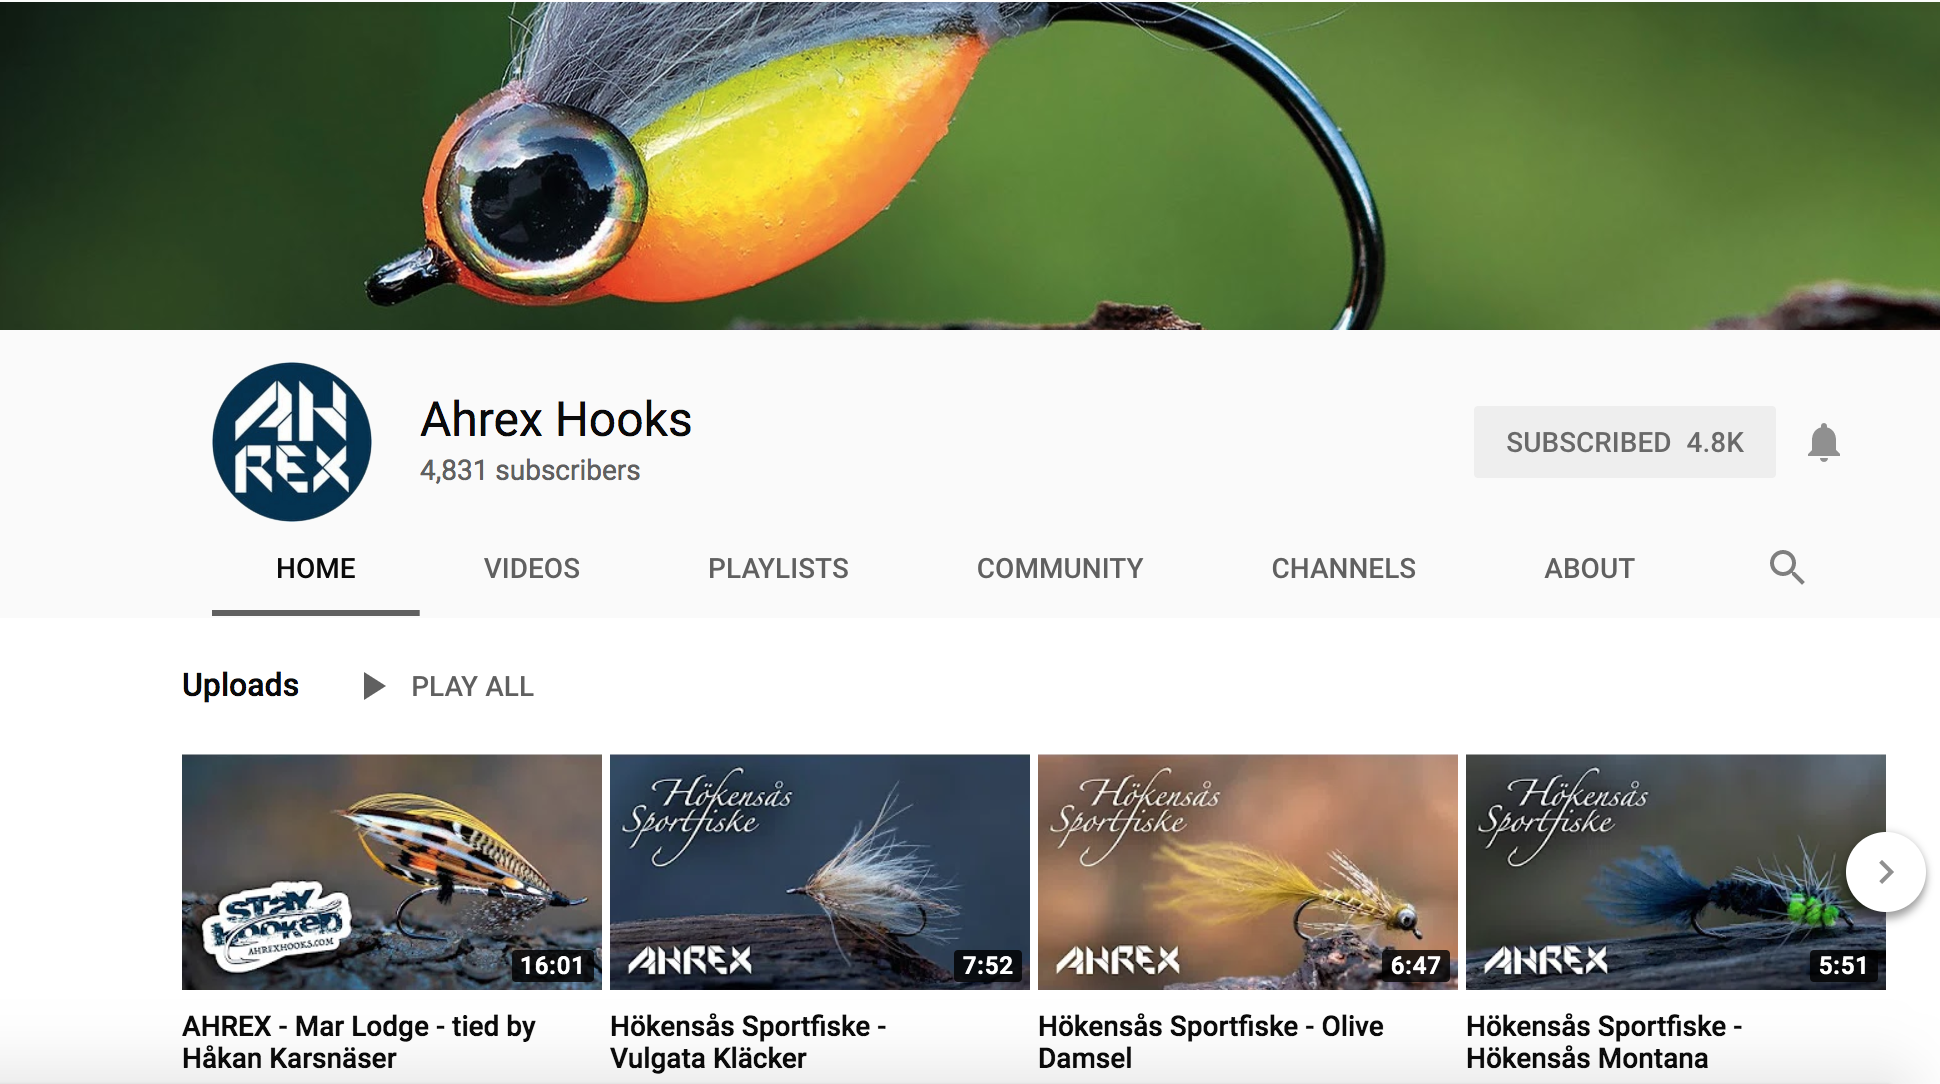 A short run down on the Ahrex Hooks  channel - Ahrex Hooks